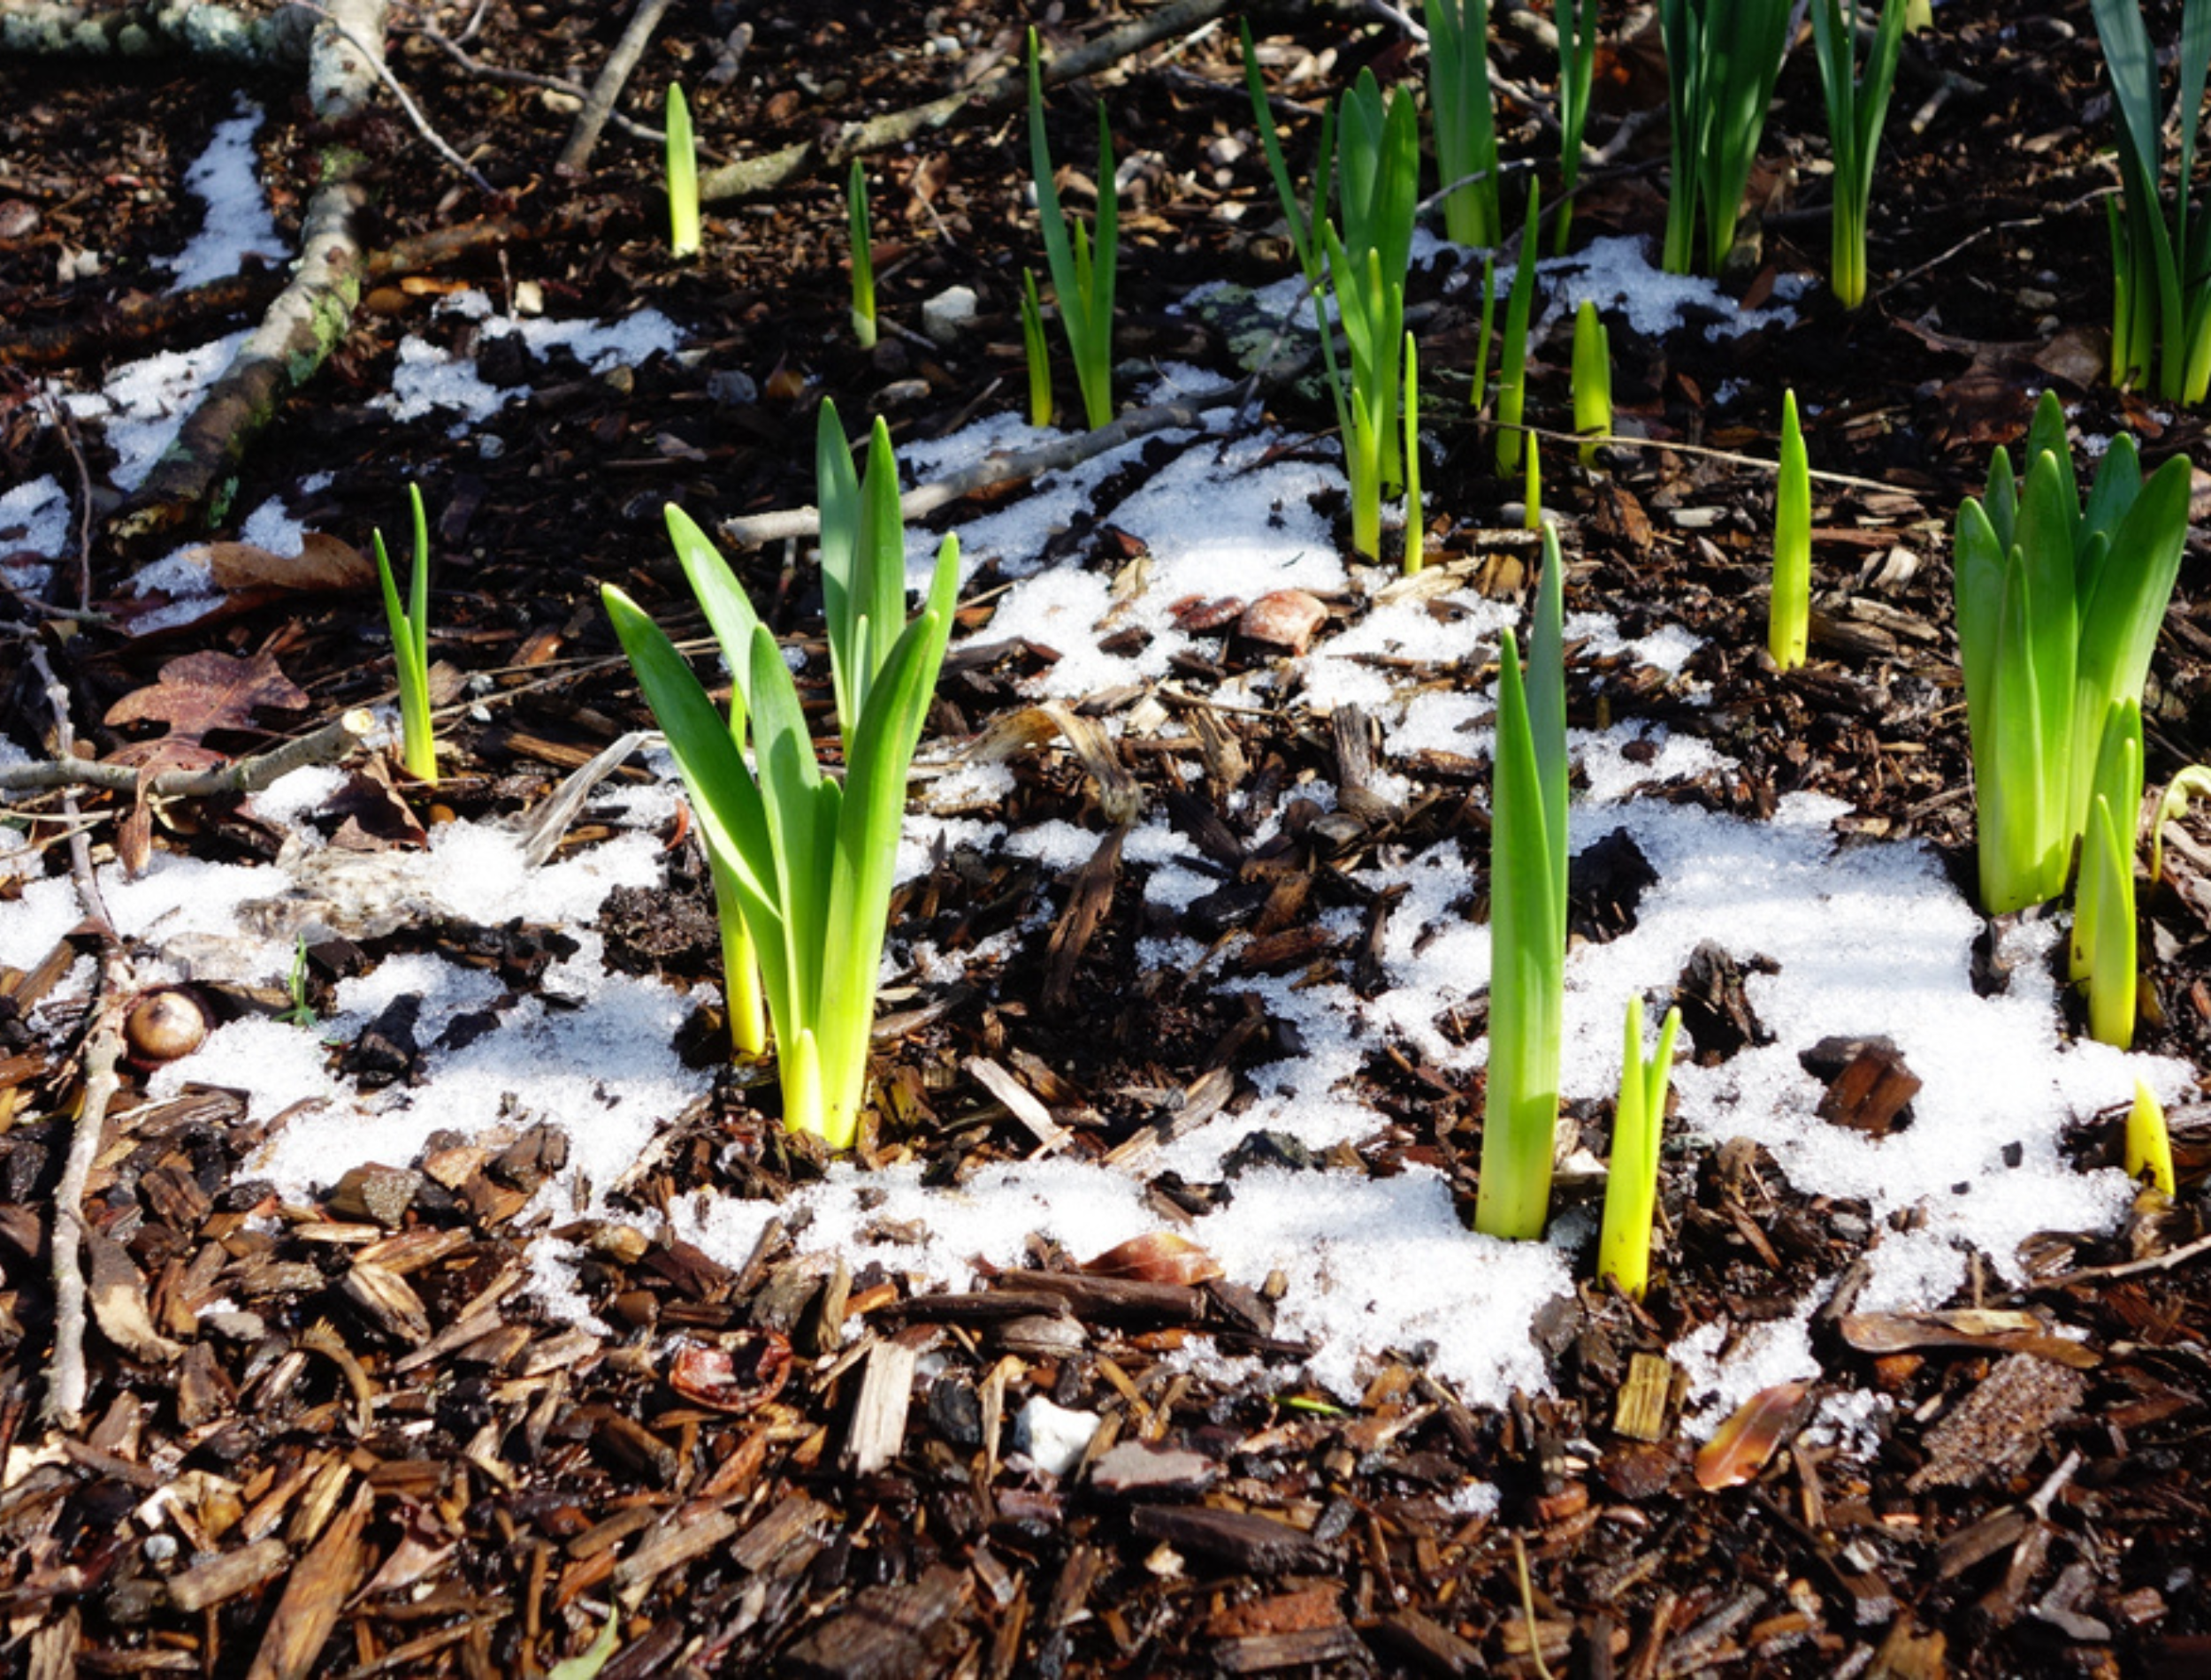 Daffodil bulbs beginning to sprout out of snowy mulch in early spring